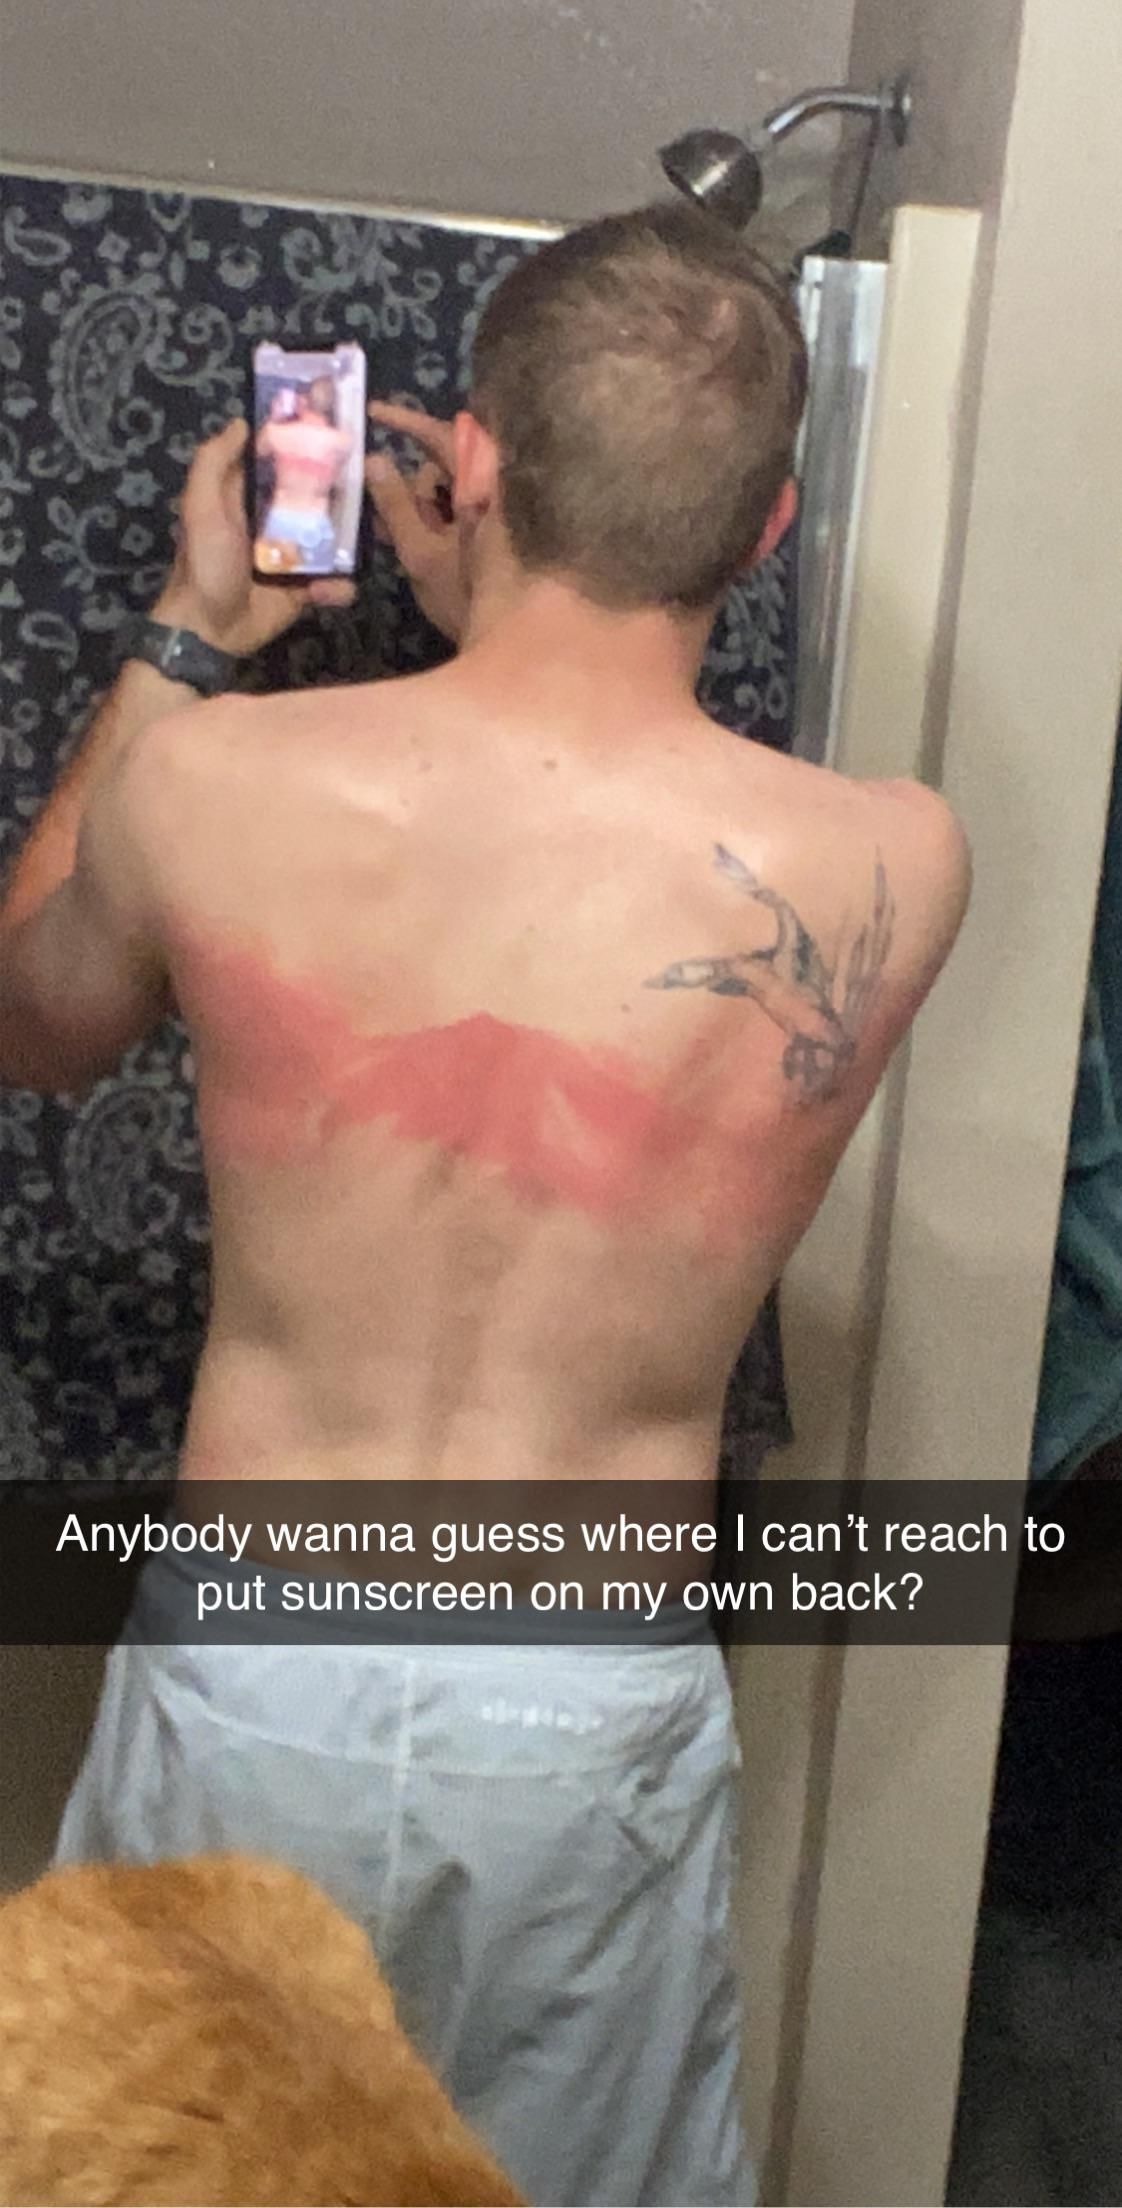 Put sunscreen on my own back. May have missed a spot.